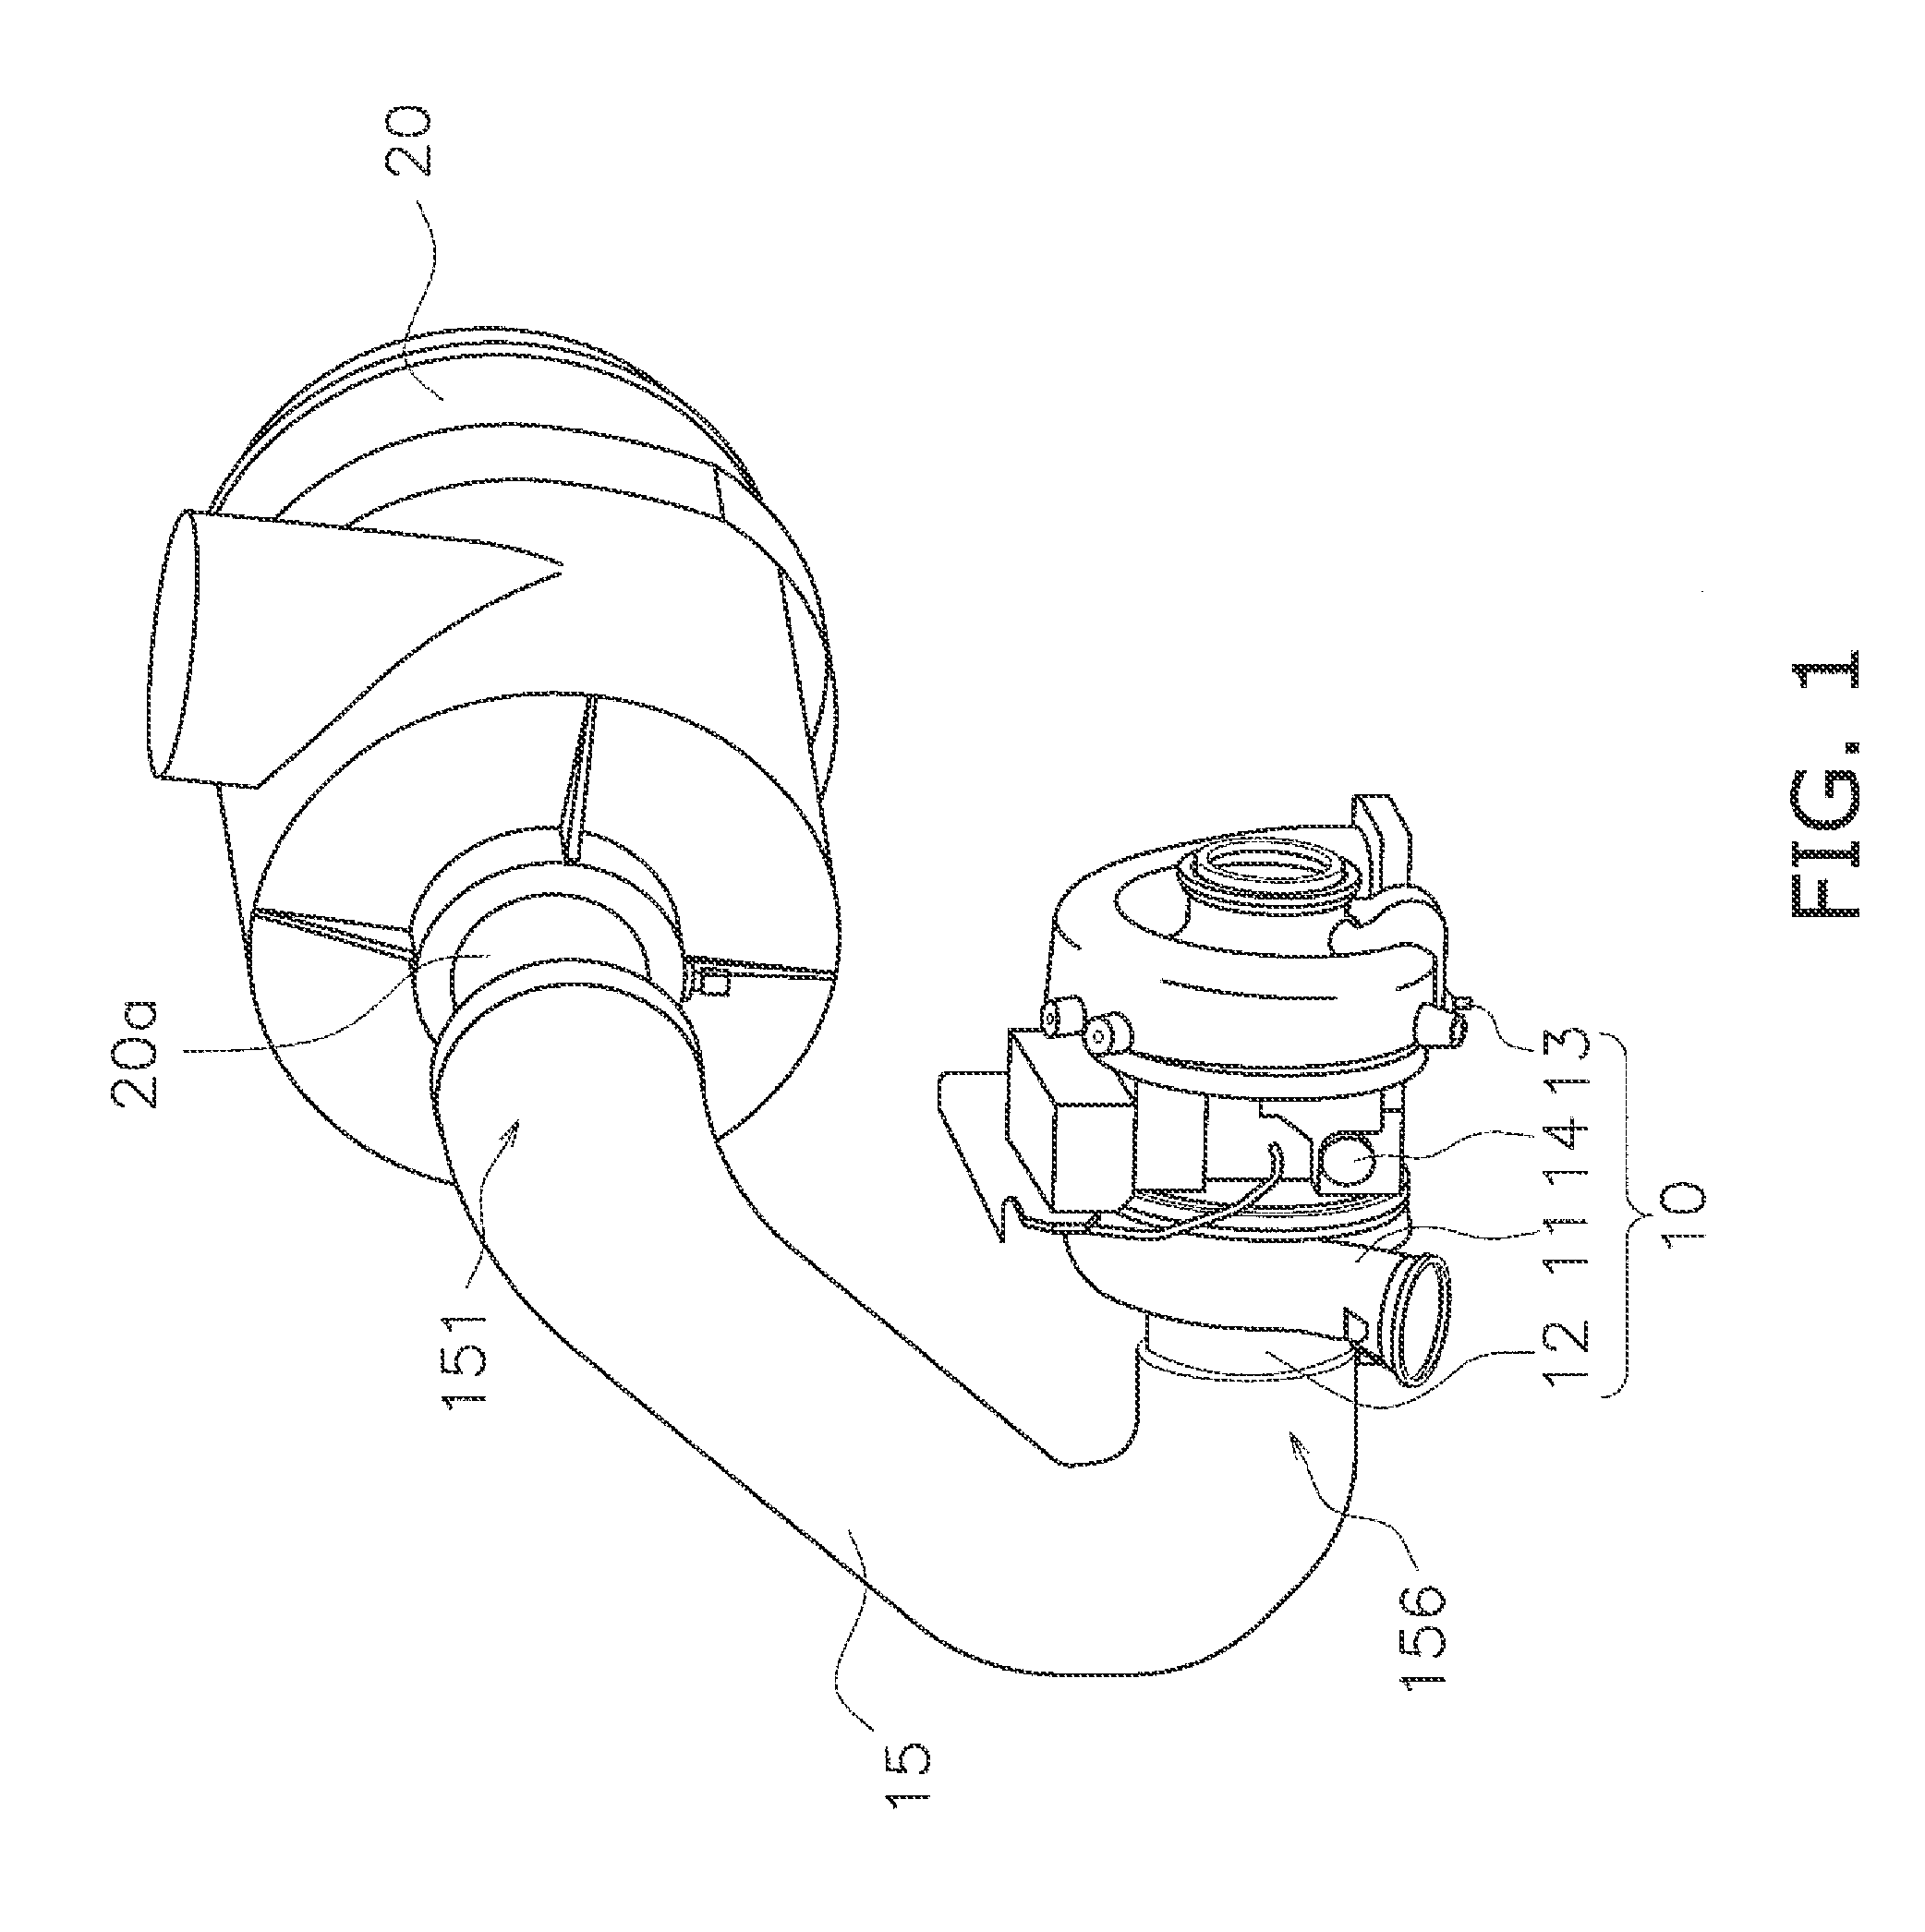 Air supply pipe and forced induction compressor